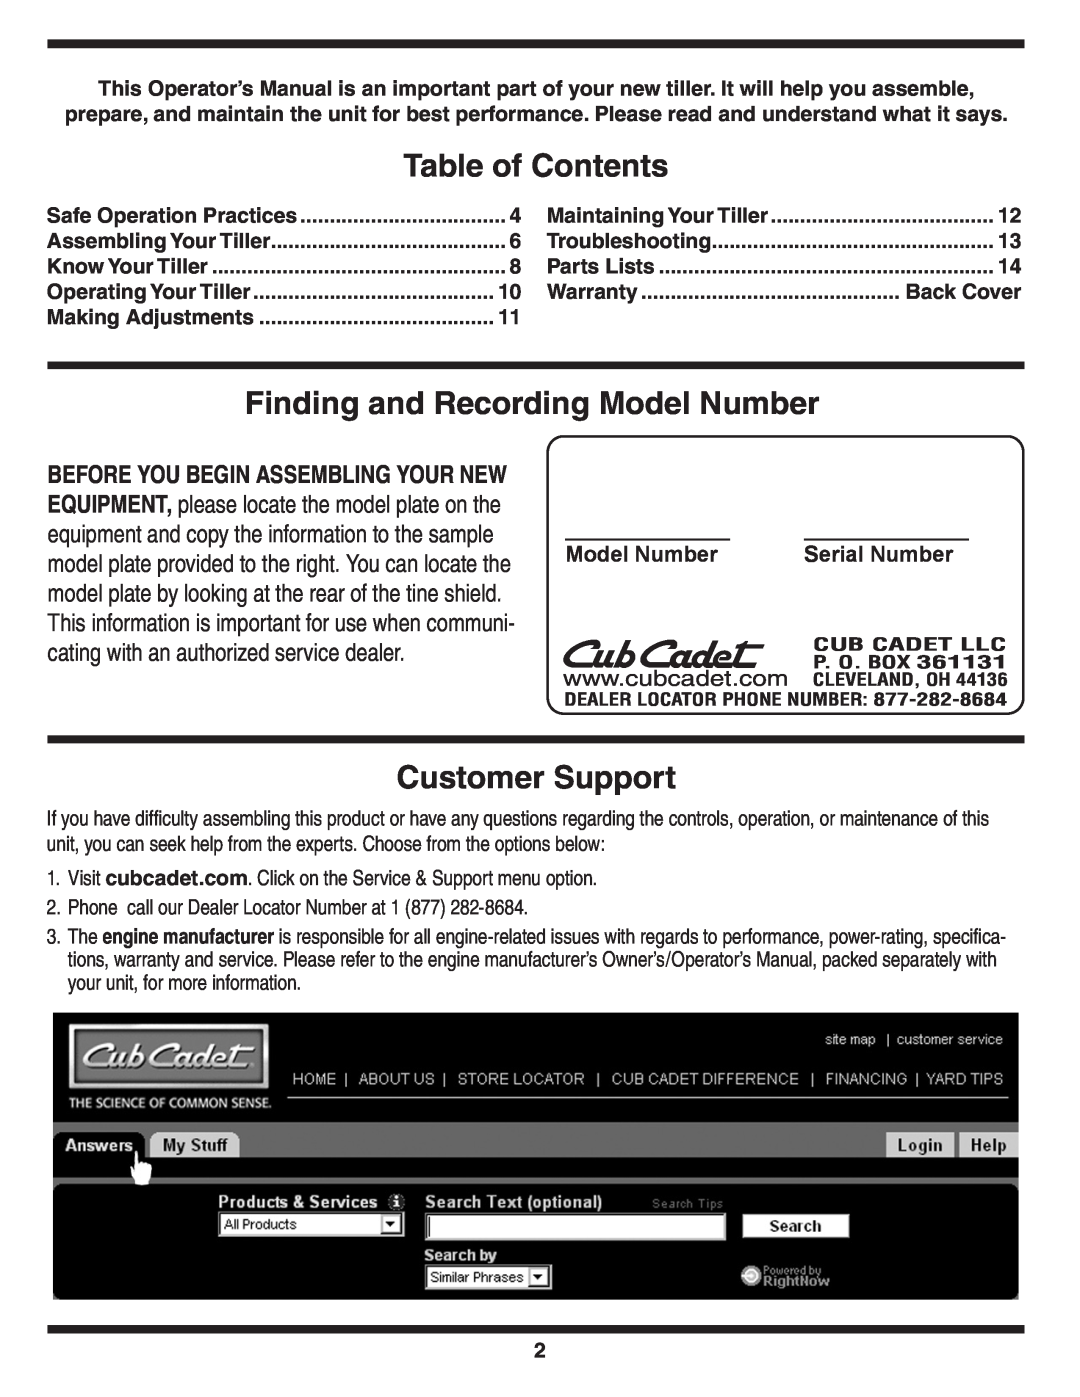 Cub Cadet 450 warranty Table of Contents, Finding and Recording Model Number, Customer Support, Safe Operation Practices 